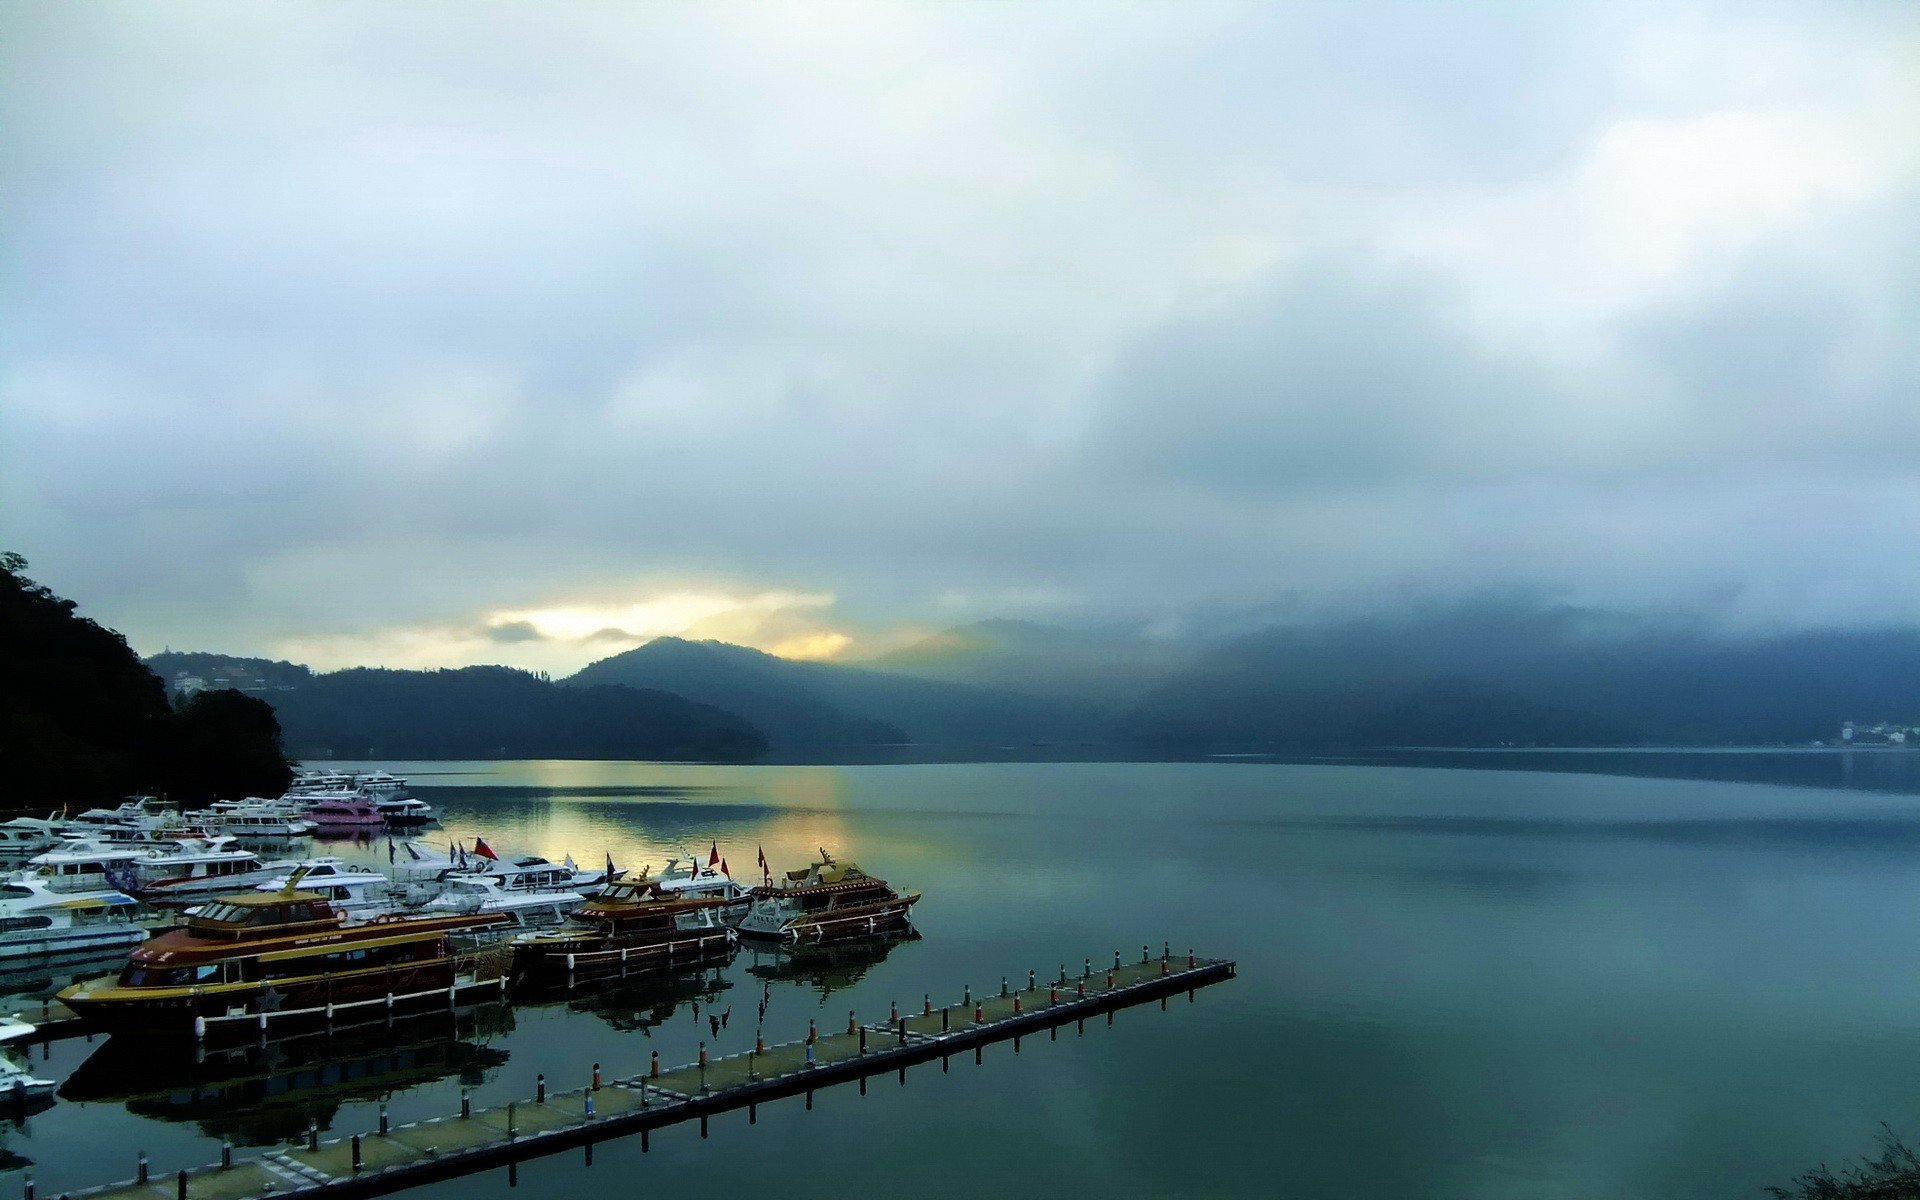 Water Sunrise Mountains Clouds Landscapes Dock Ships Piers